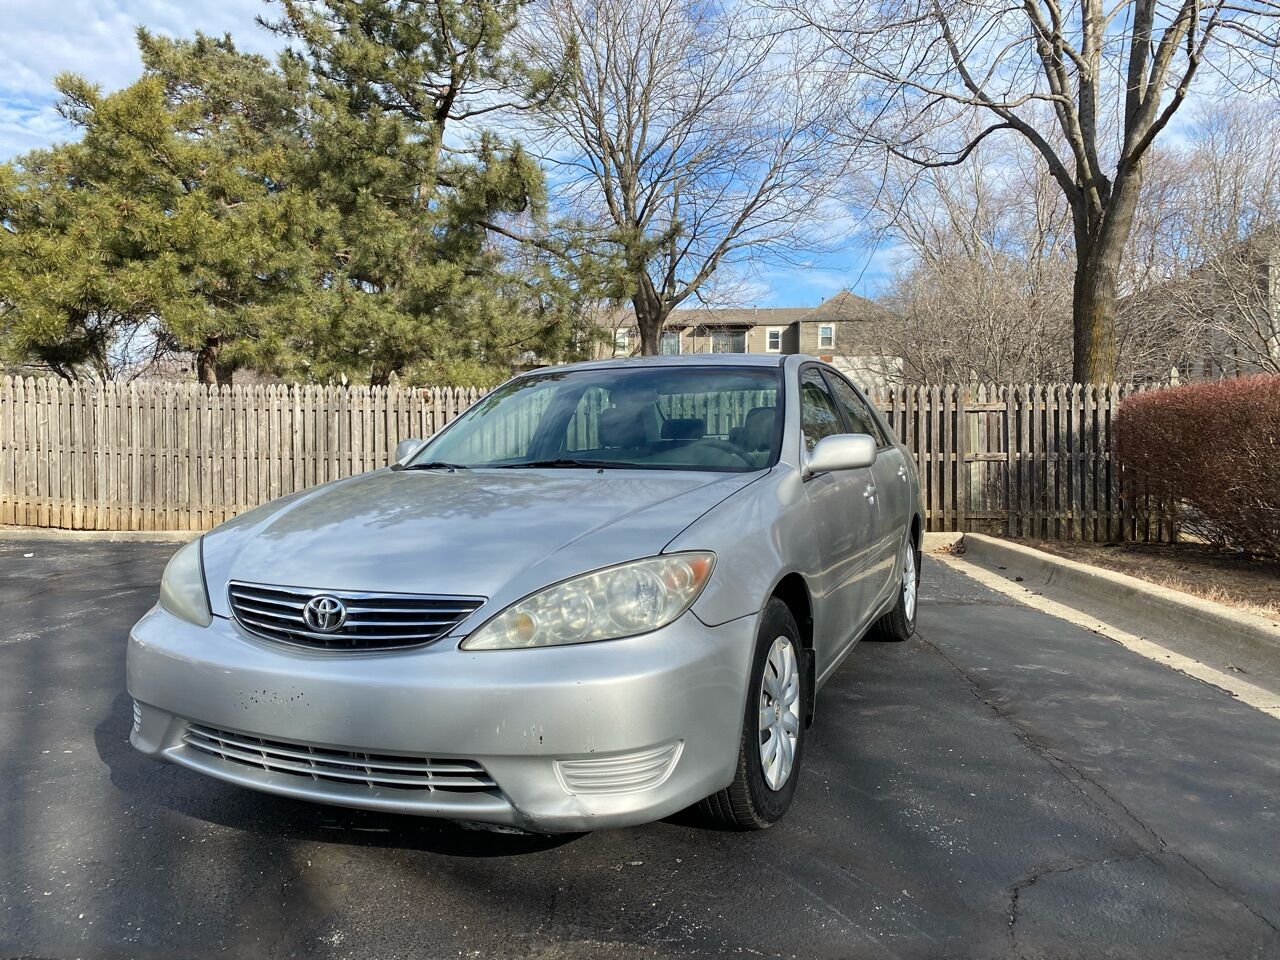 2005 Toyota Camry For Sale In Lees Summit, MO ®